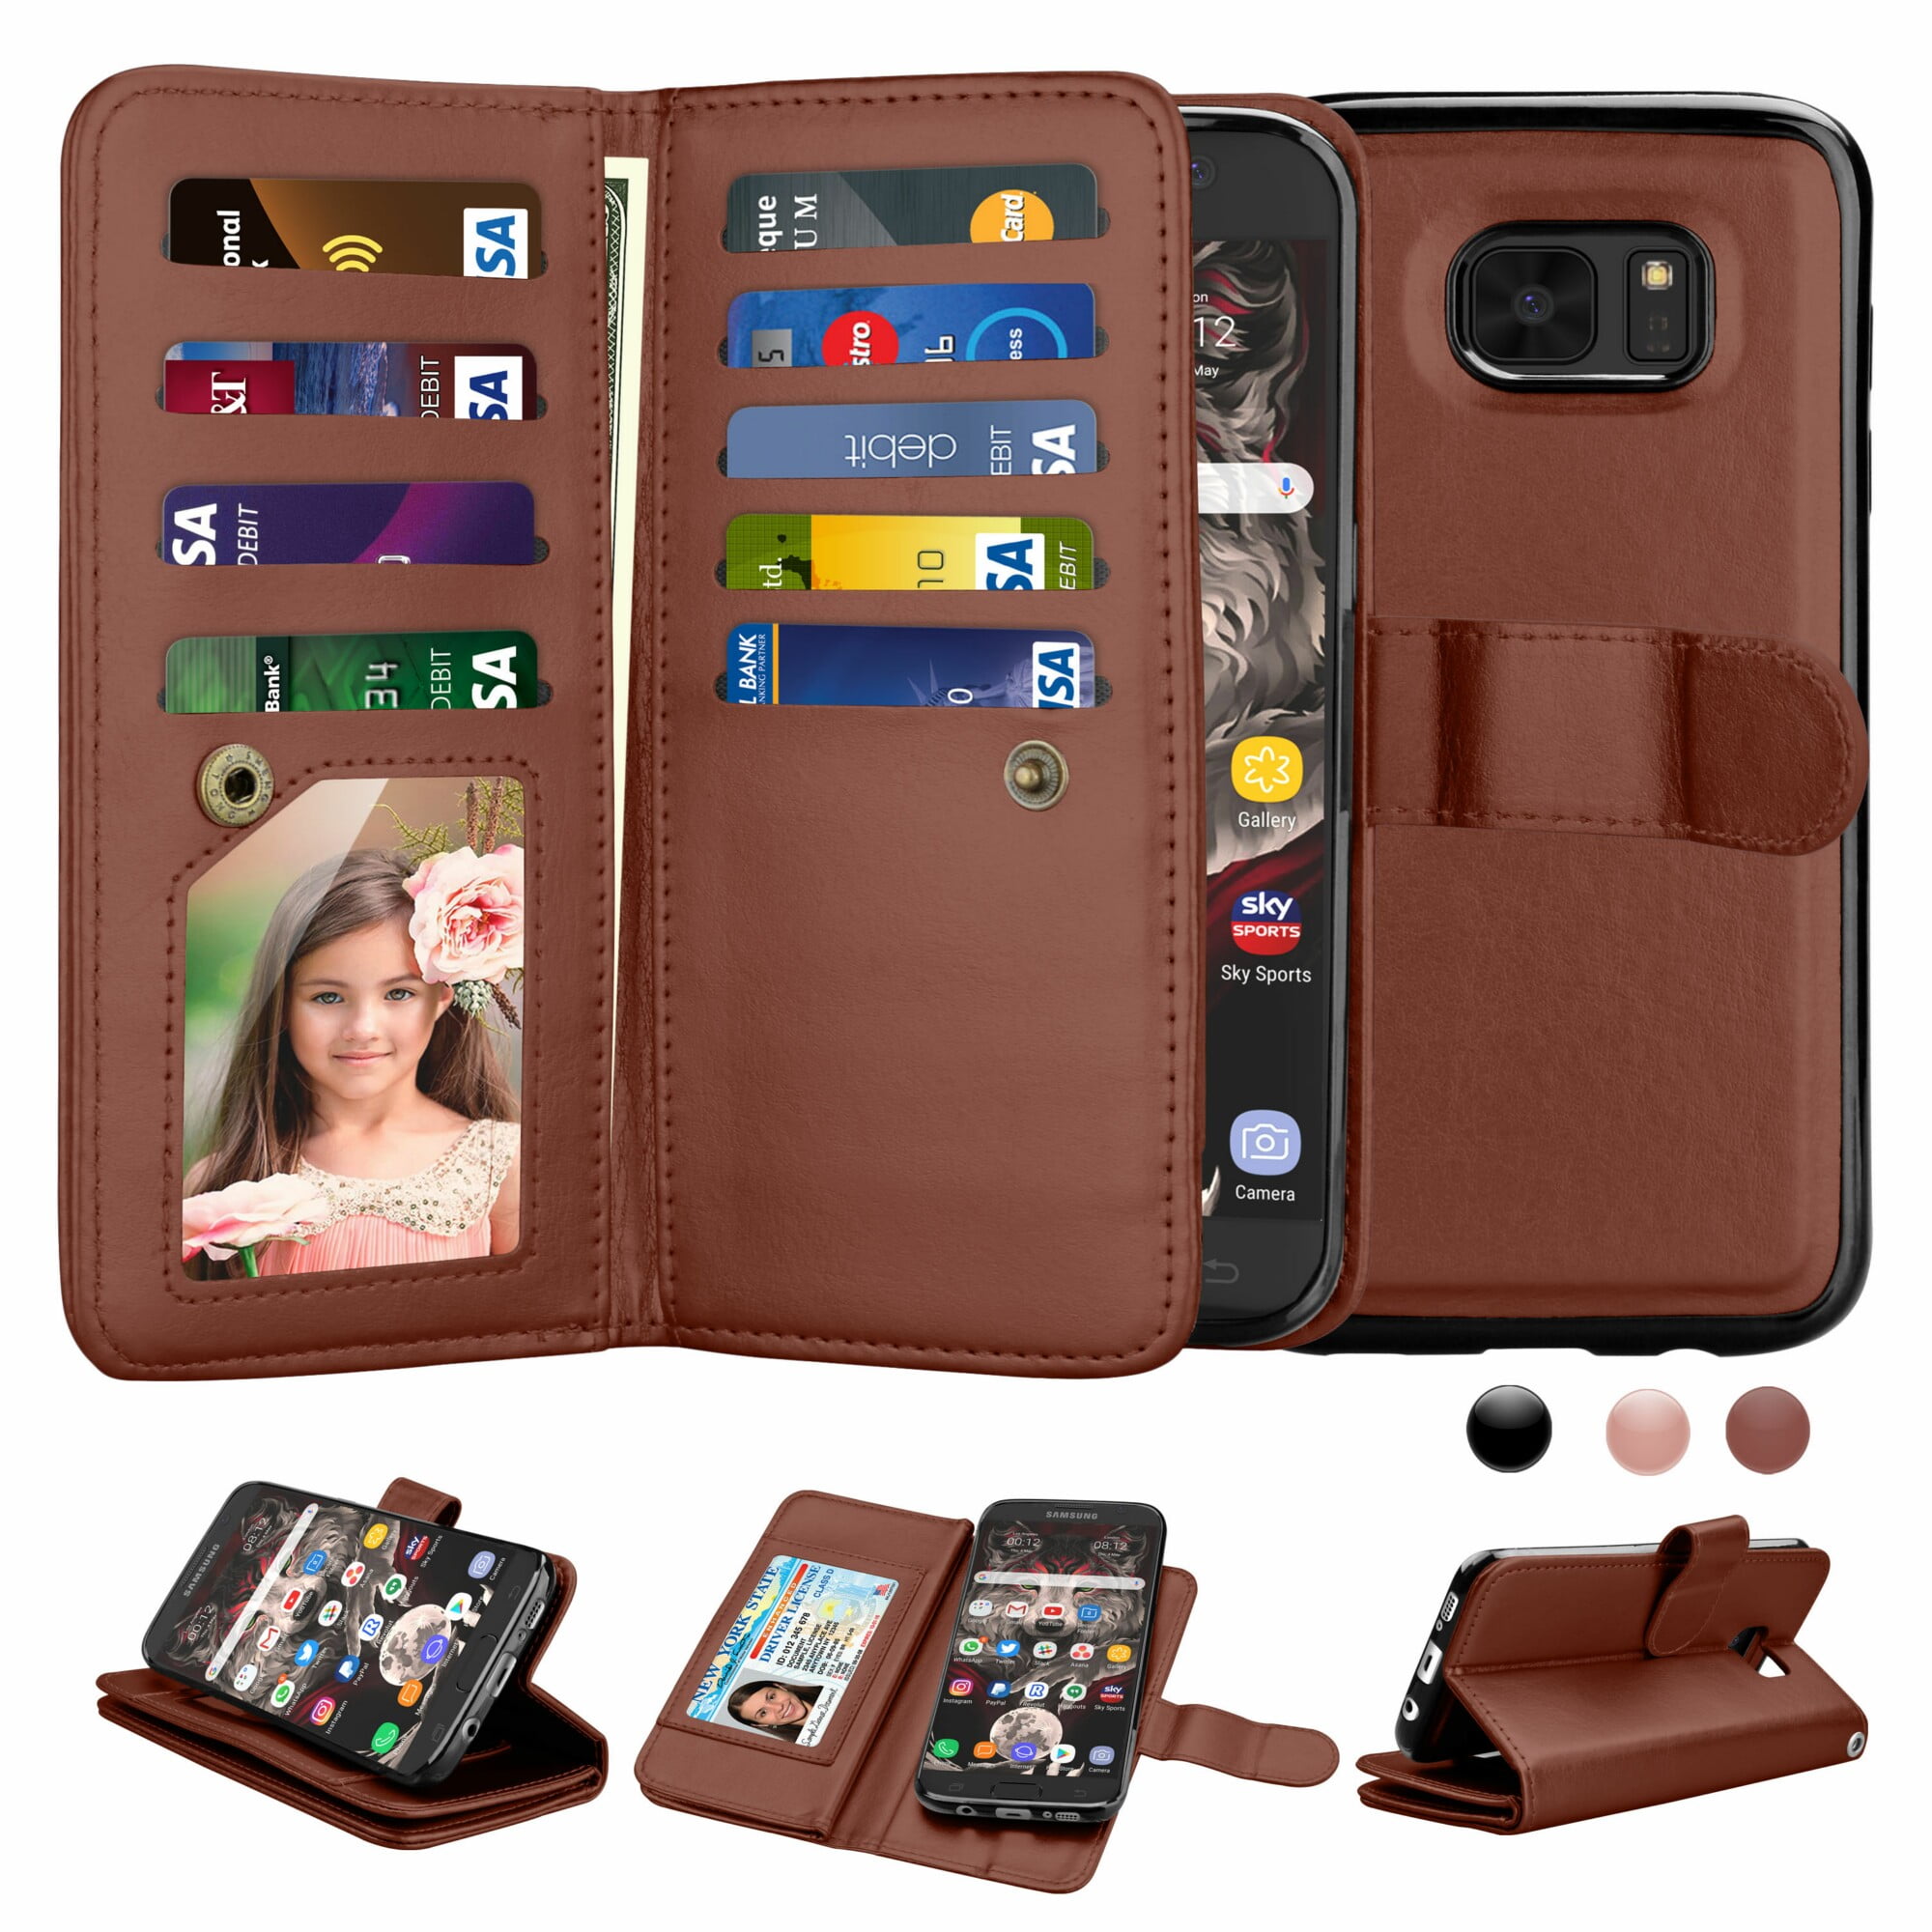 Flip Case for Samsung Galaxy S7 Edge Leather Cover Business Gifts Wallet with Extra Waterproof Underwater Case 